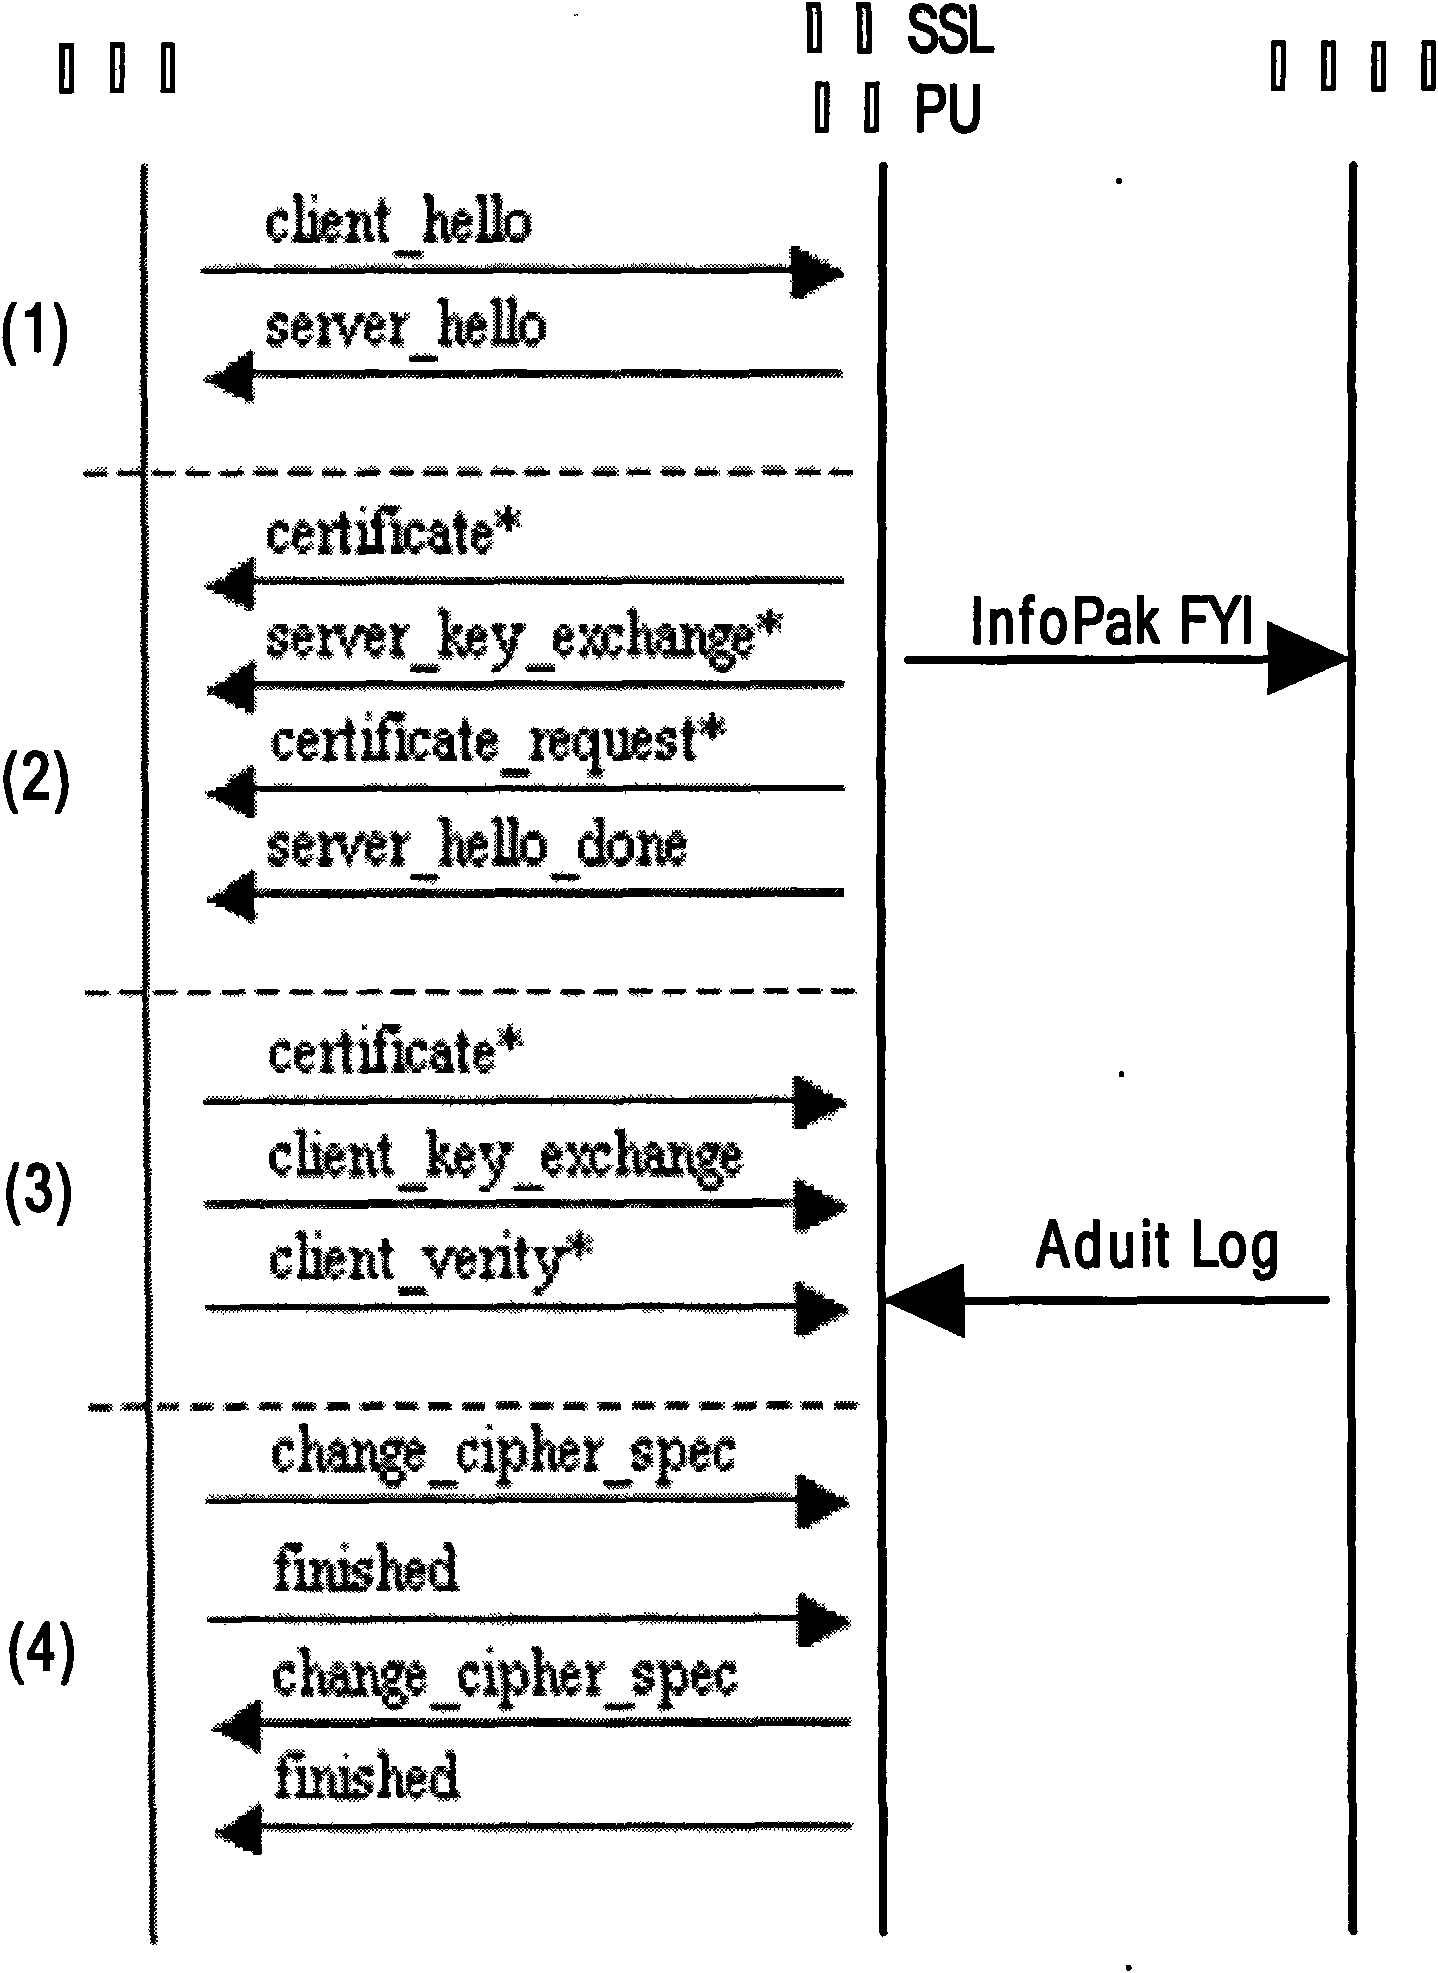 Design architecture and method for secure load balancing by utilizing SSL communication protocol